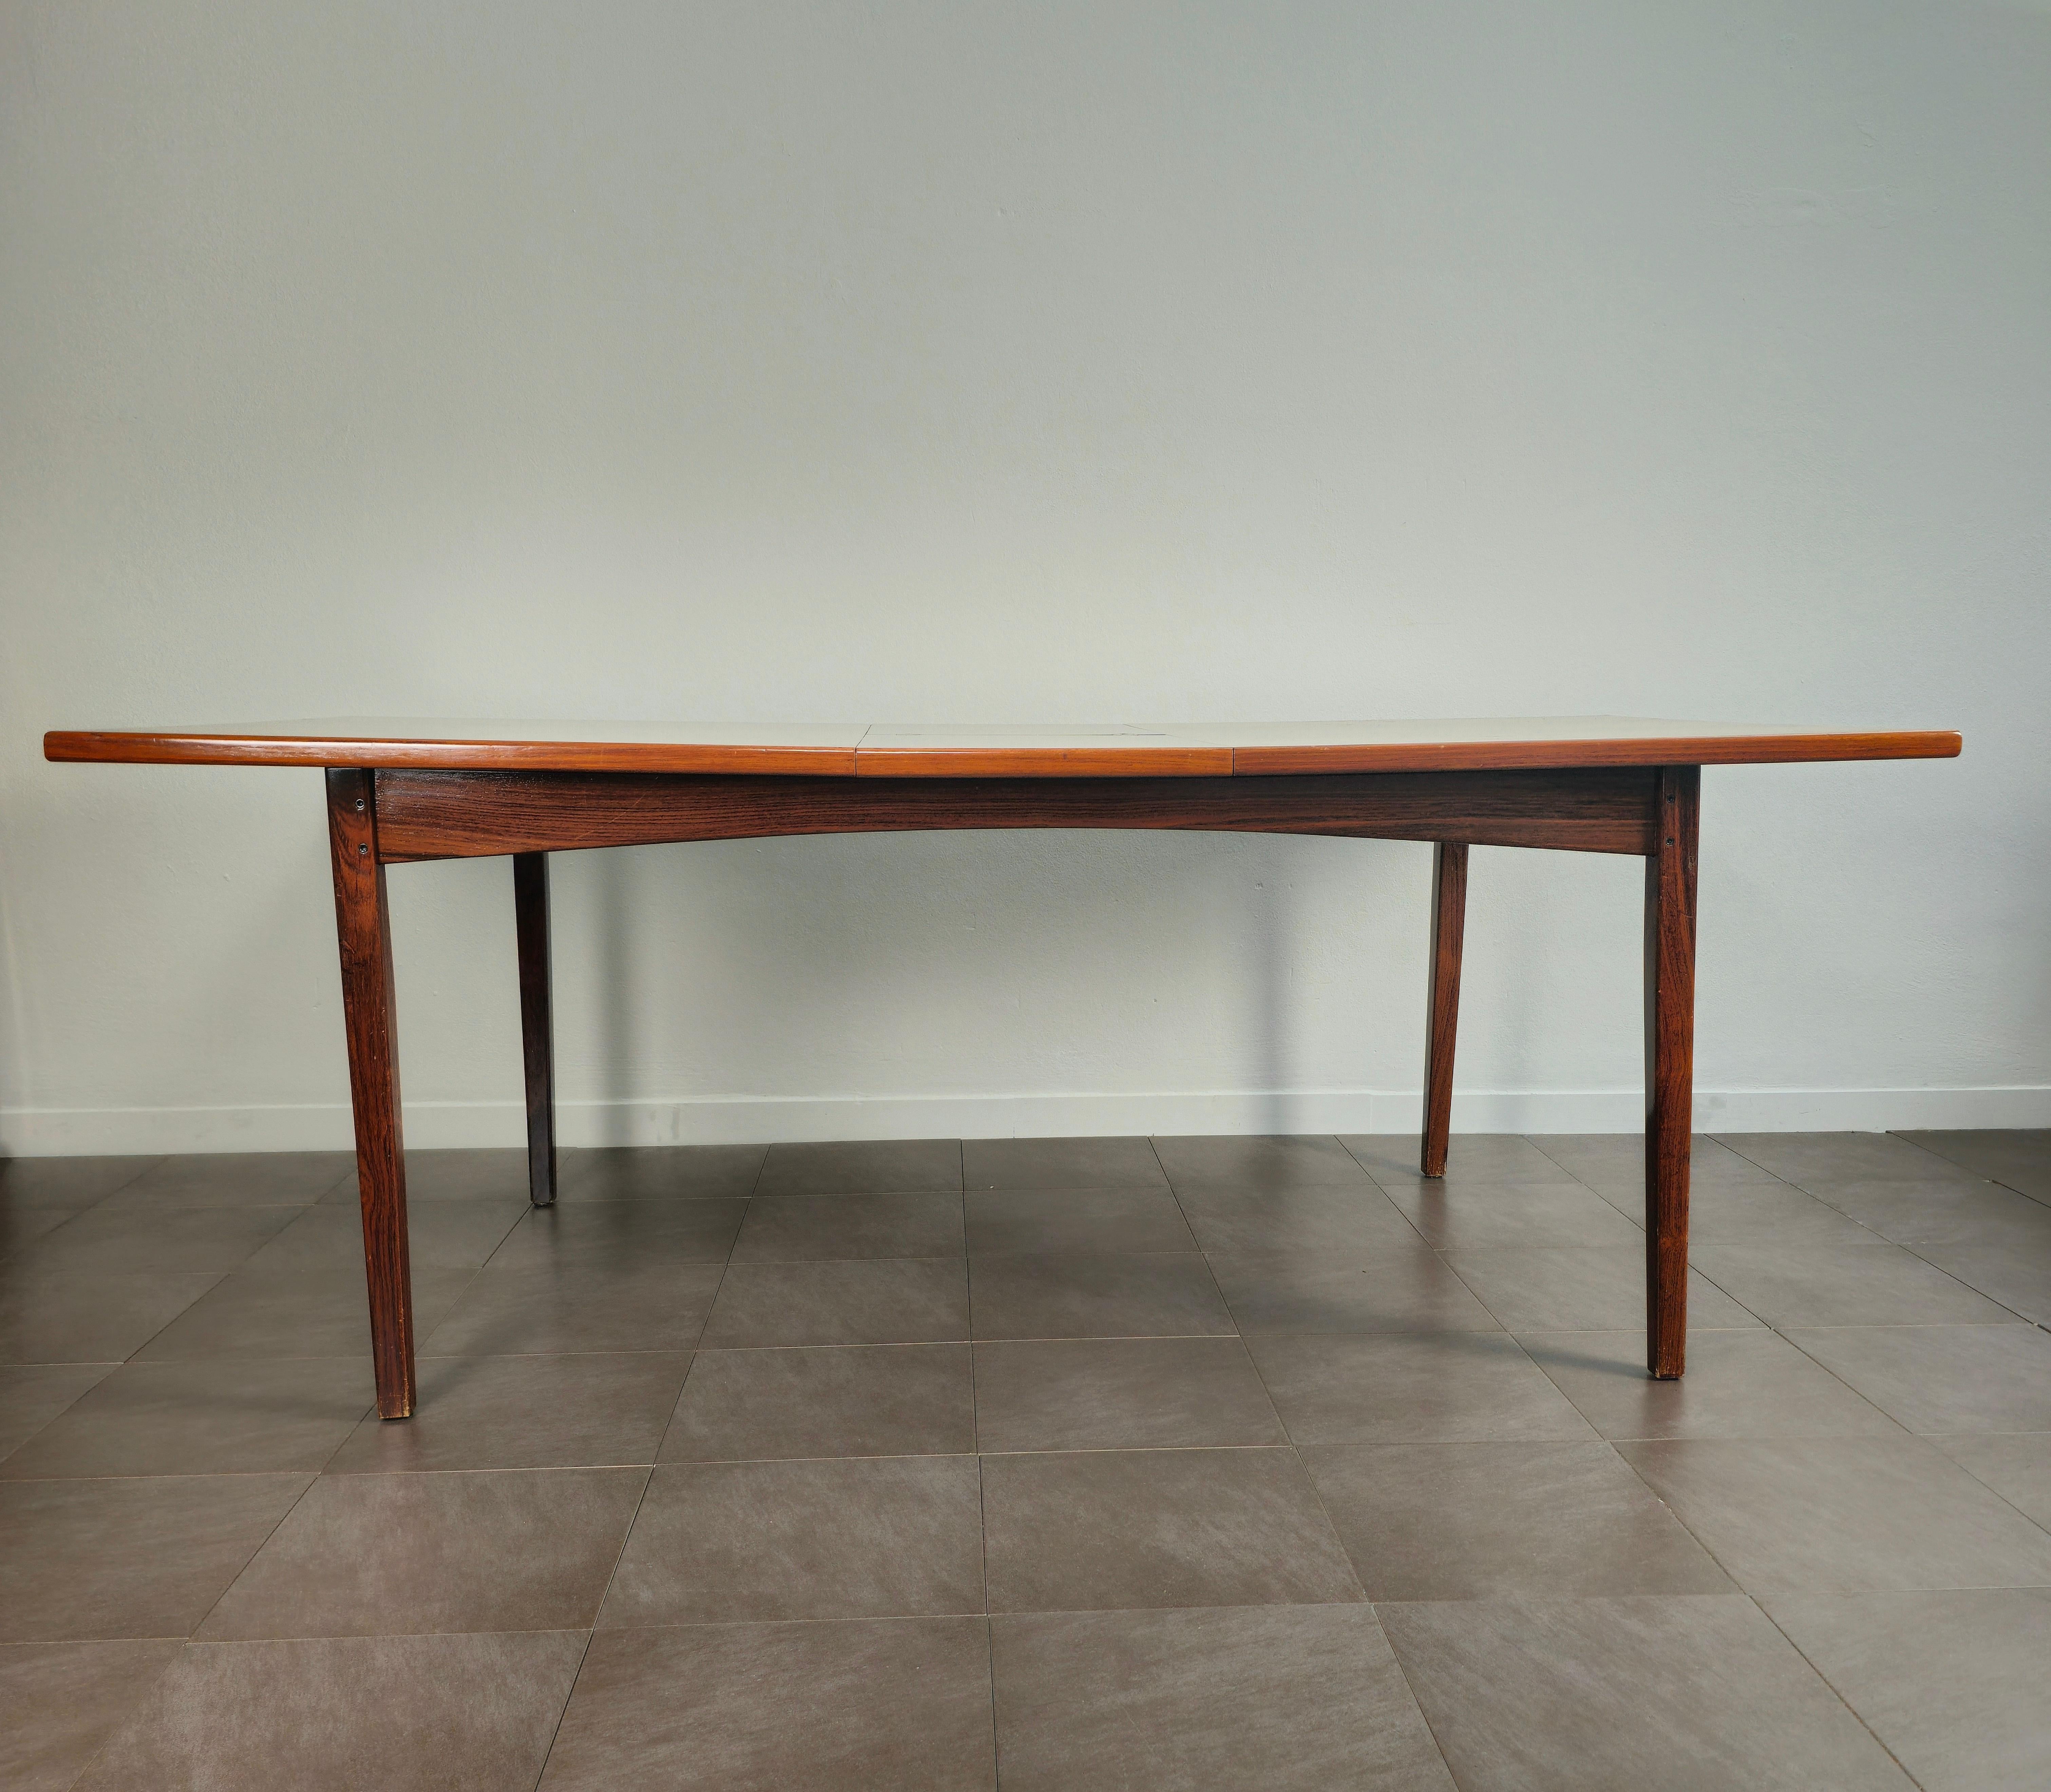 Wood Dining Room Table Extendable Large Rectangular Midcentury, Denmark, 1960s For Sale 2